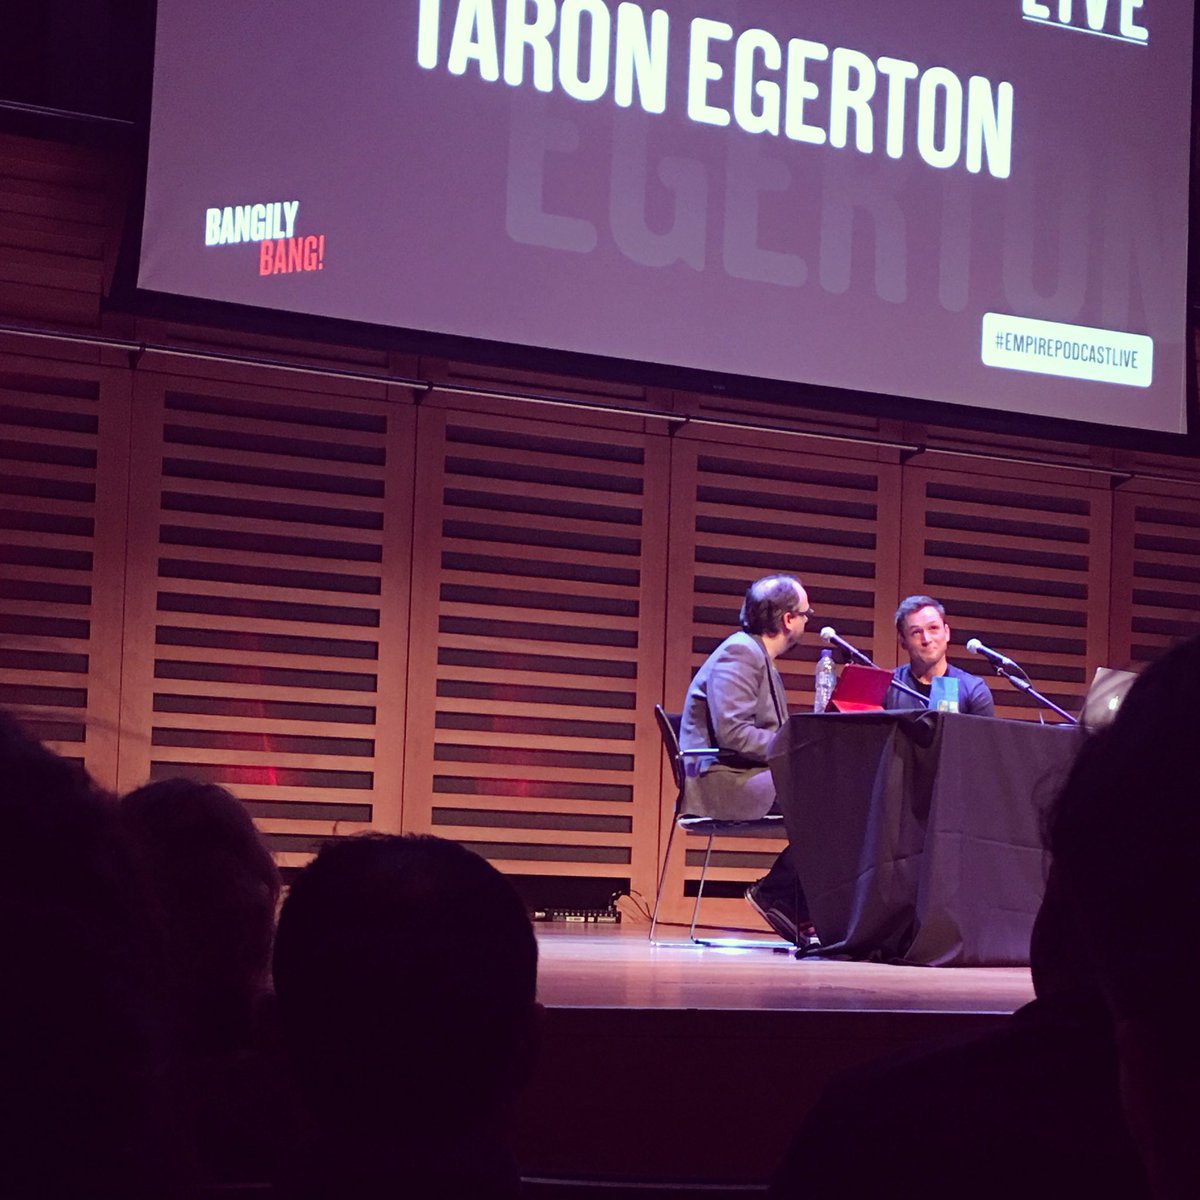 Valentine’s Day @KingsPlace with @TaronEgerton and #EmpirePodcastLive ❤️